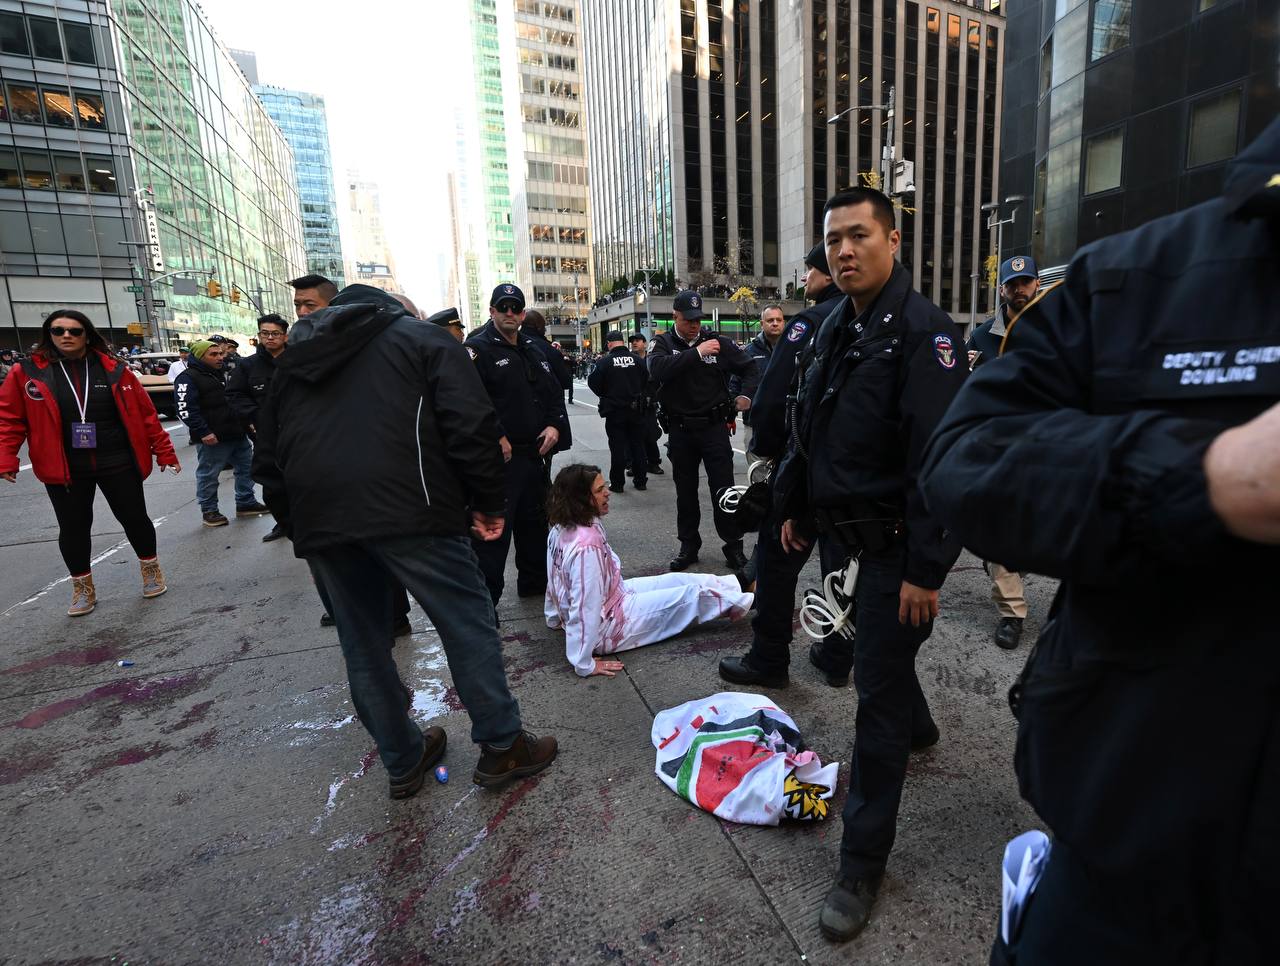 aa-20231123-33003646-33003627-police-arrest-propalestinian-protesters-in-new-york-city-during-thanksgiving-day-parade-1.jpg